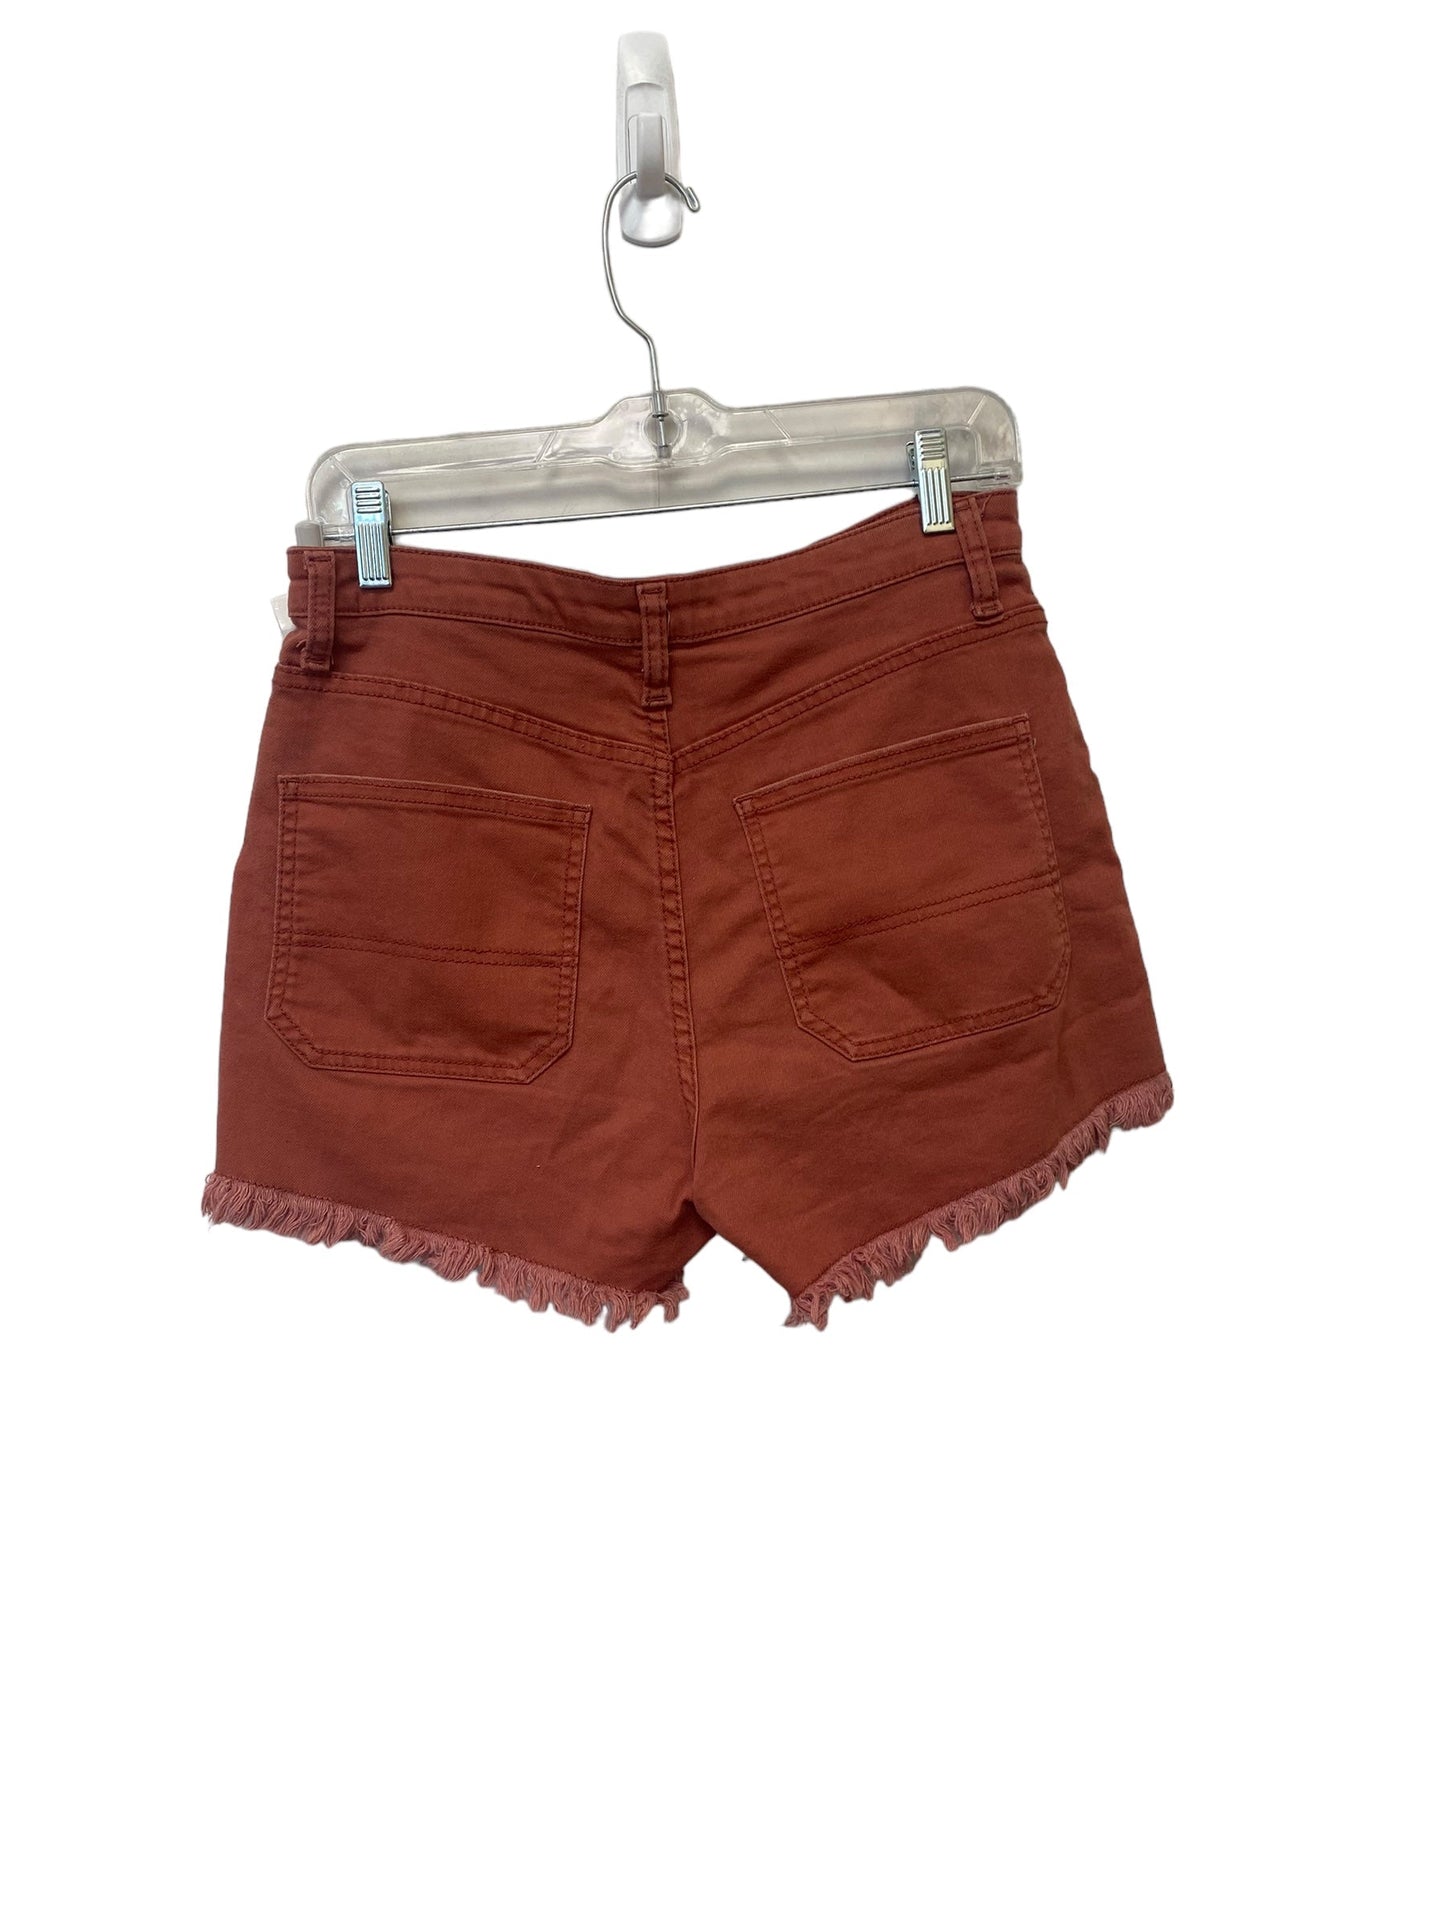 Red Shorts Clothes Mentor, Size 11